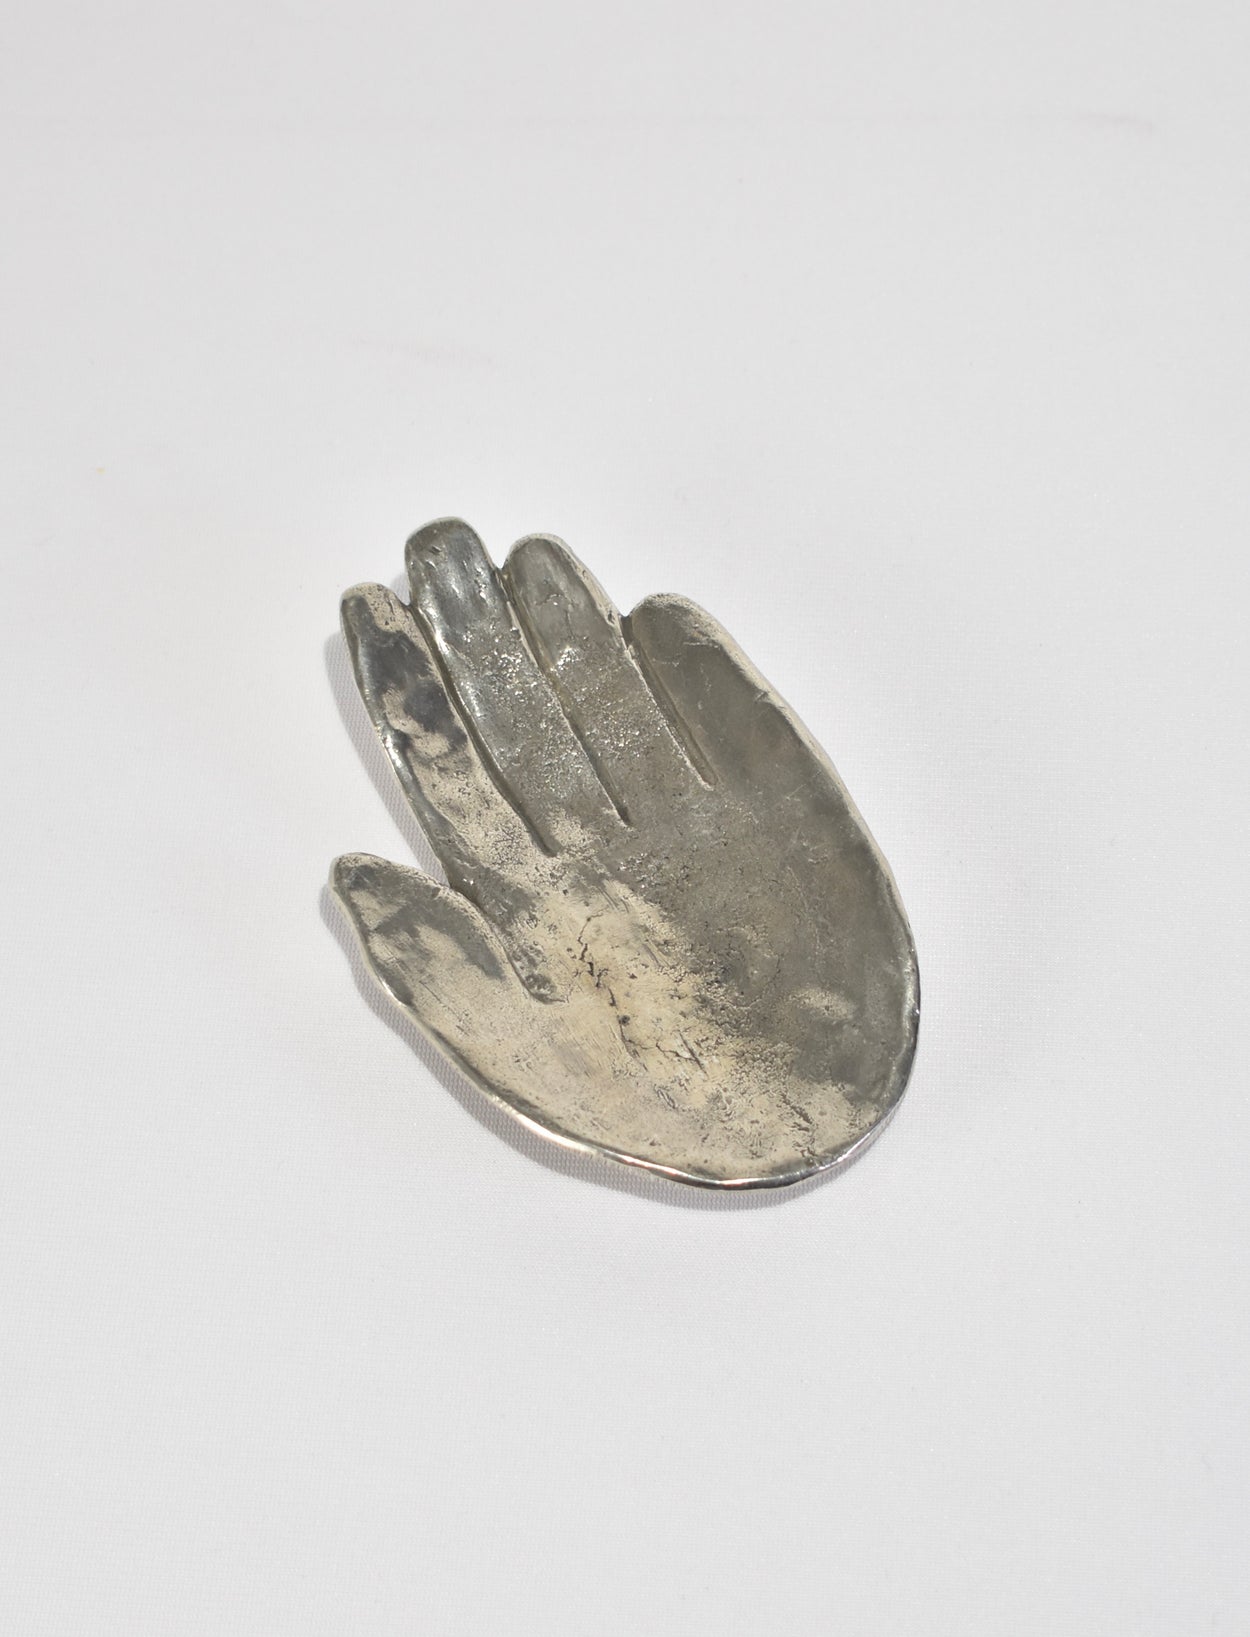 Pewter Hand Catchall